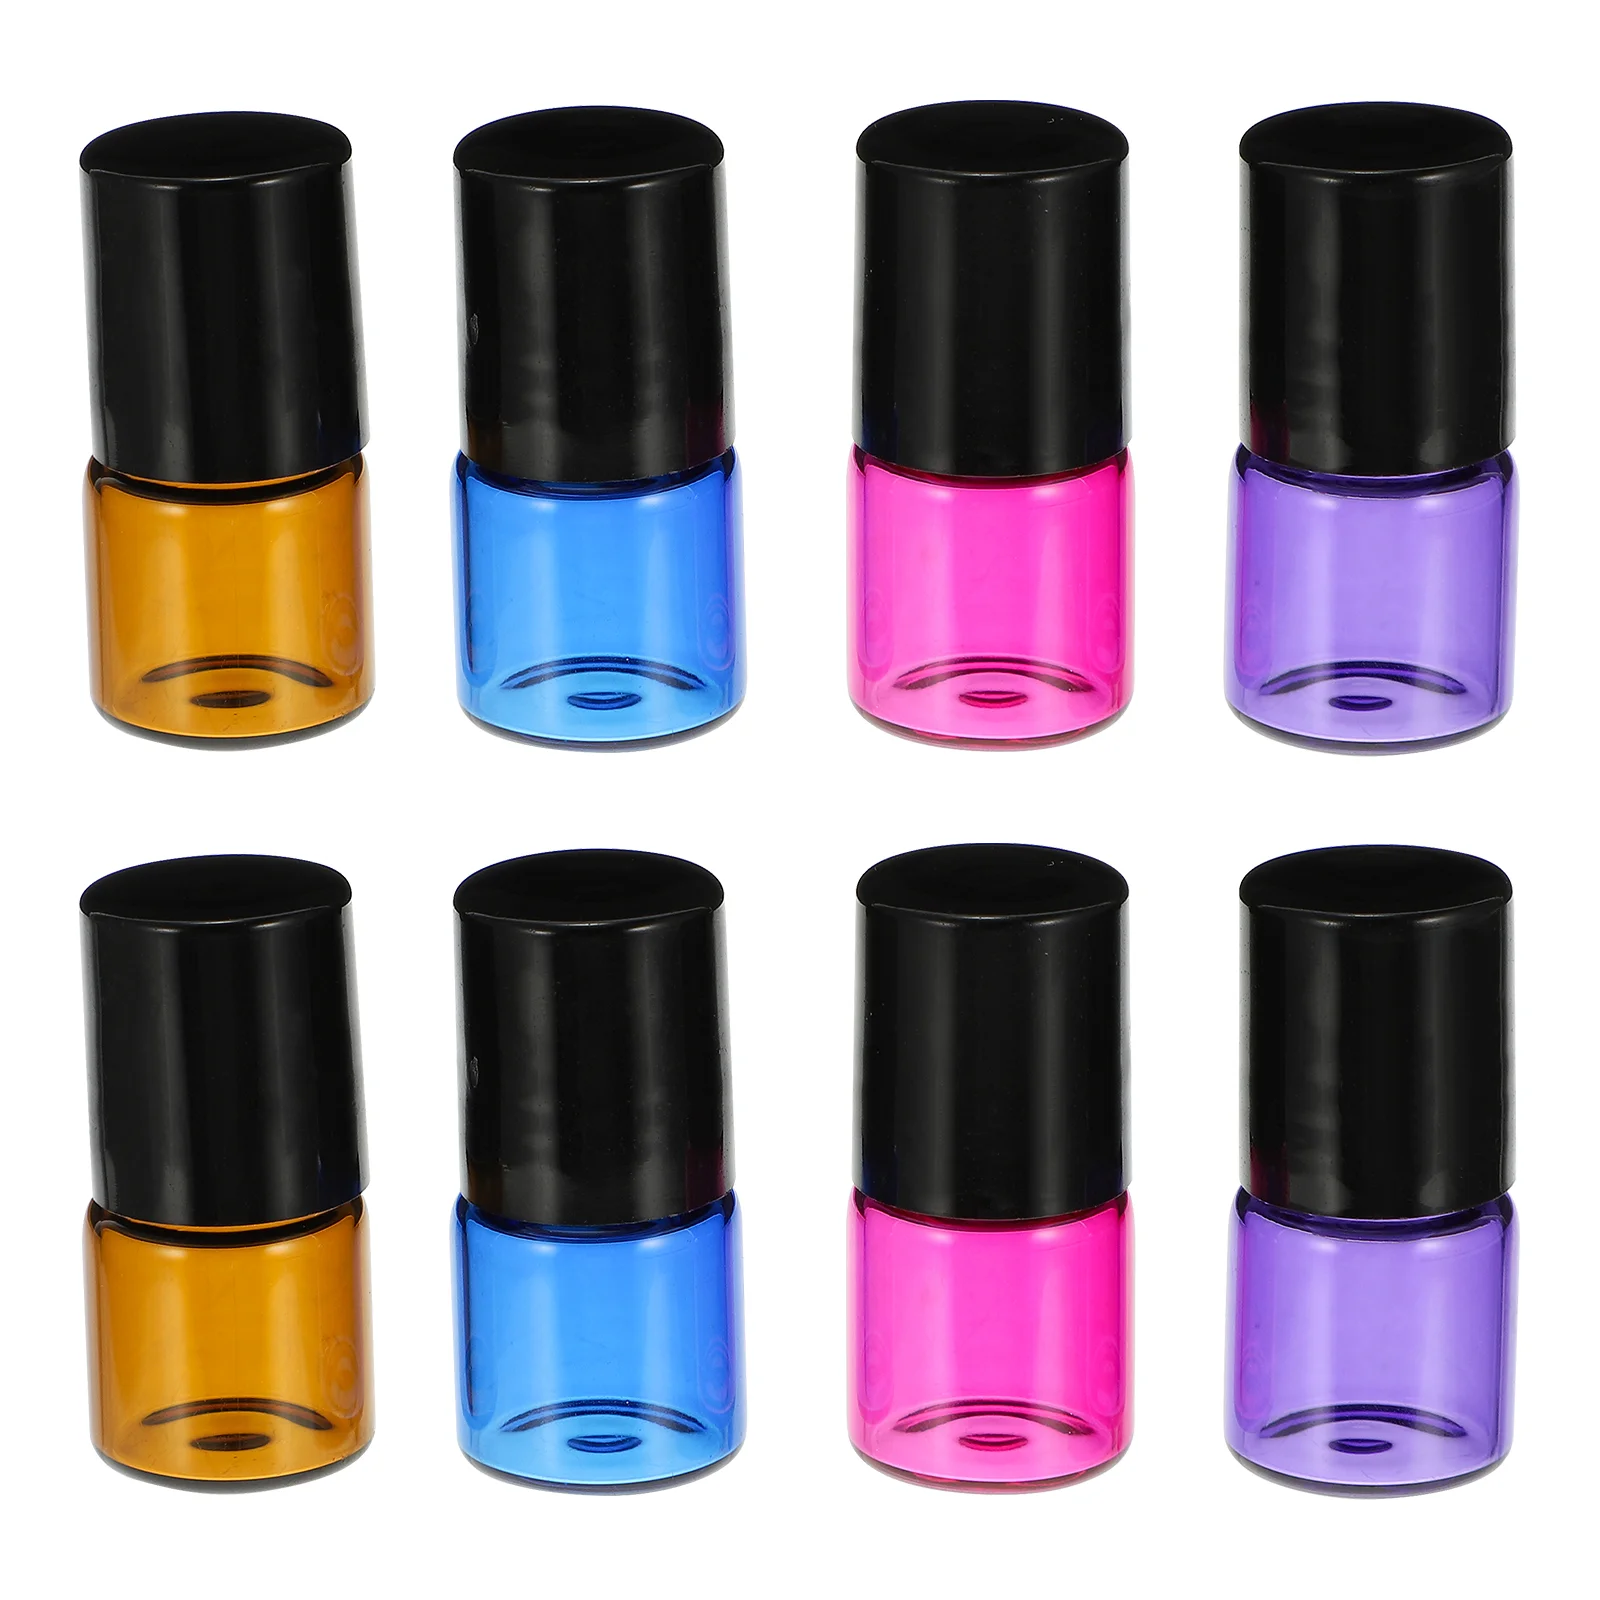 

Roller Bottles Bottle Oil Essential Refillable Vials Roll Sample Rollerball Perfume Mini 1Ml Empty Oils Tiny Clear Containers